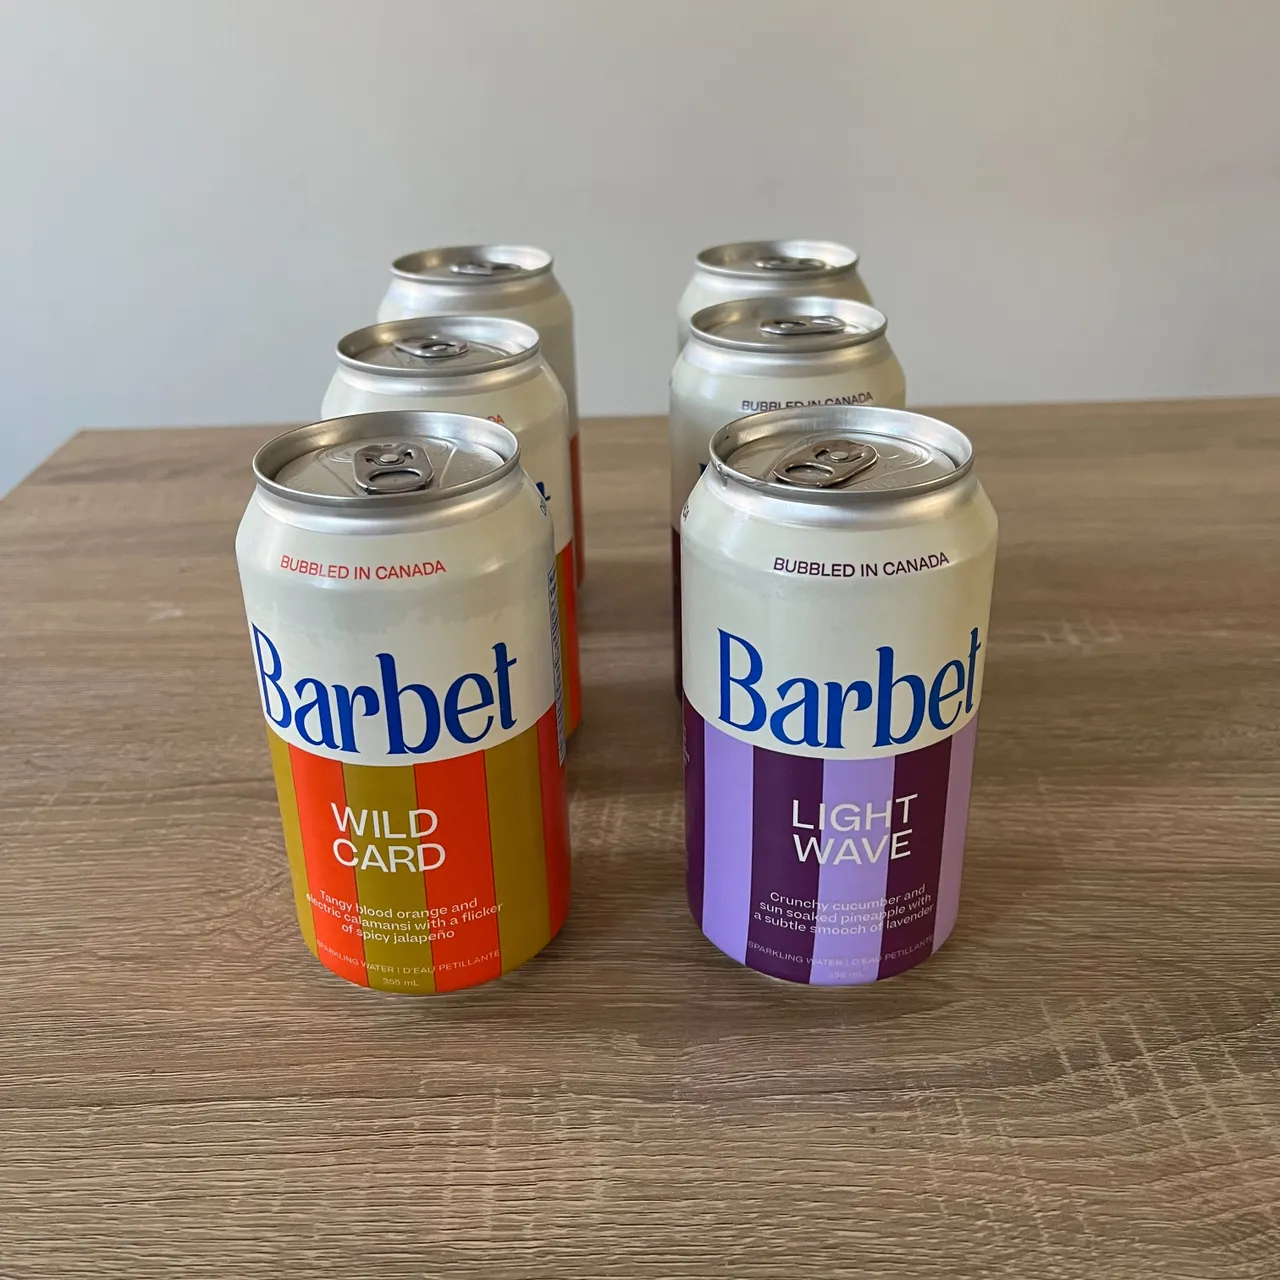 Barbet Sparkling Water Drinks photo 1